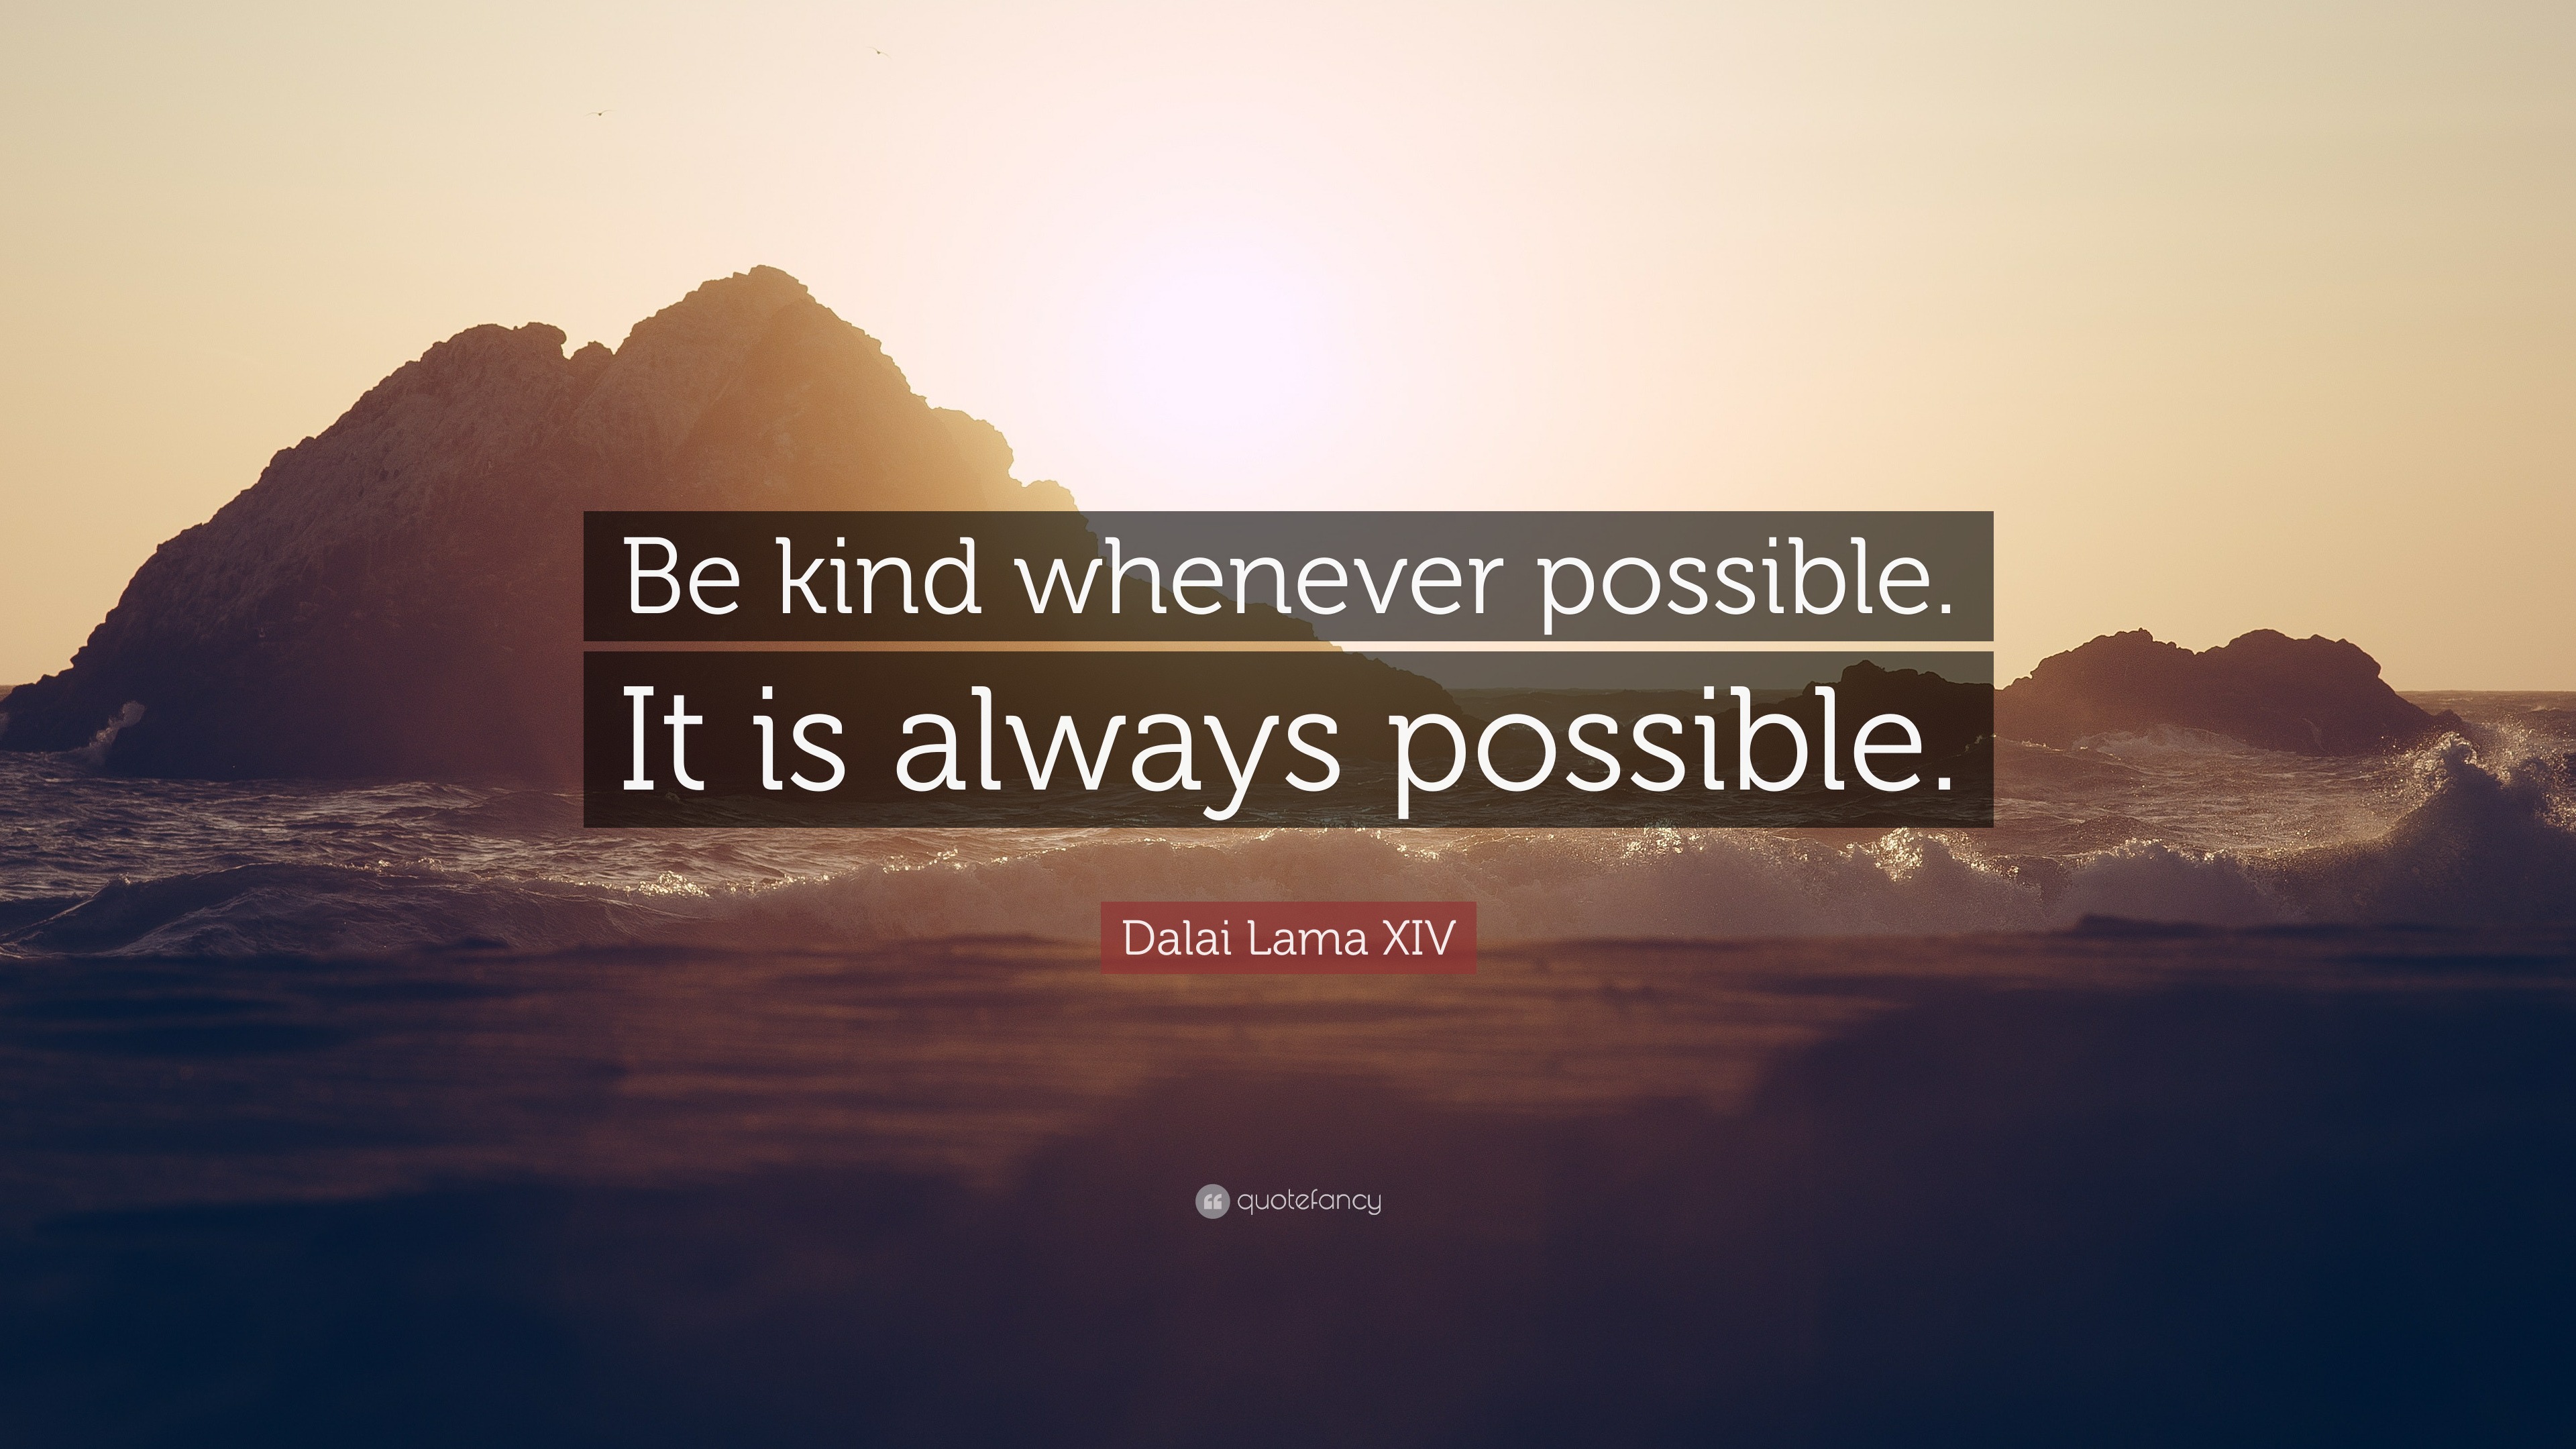 dalai lama quote be kind whenever possible